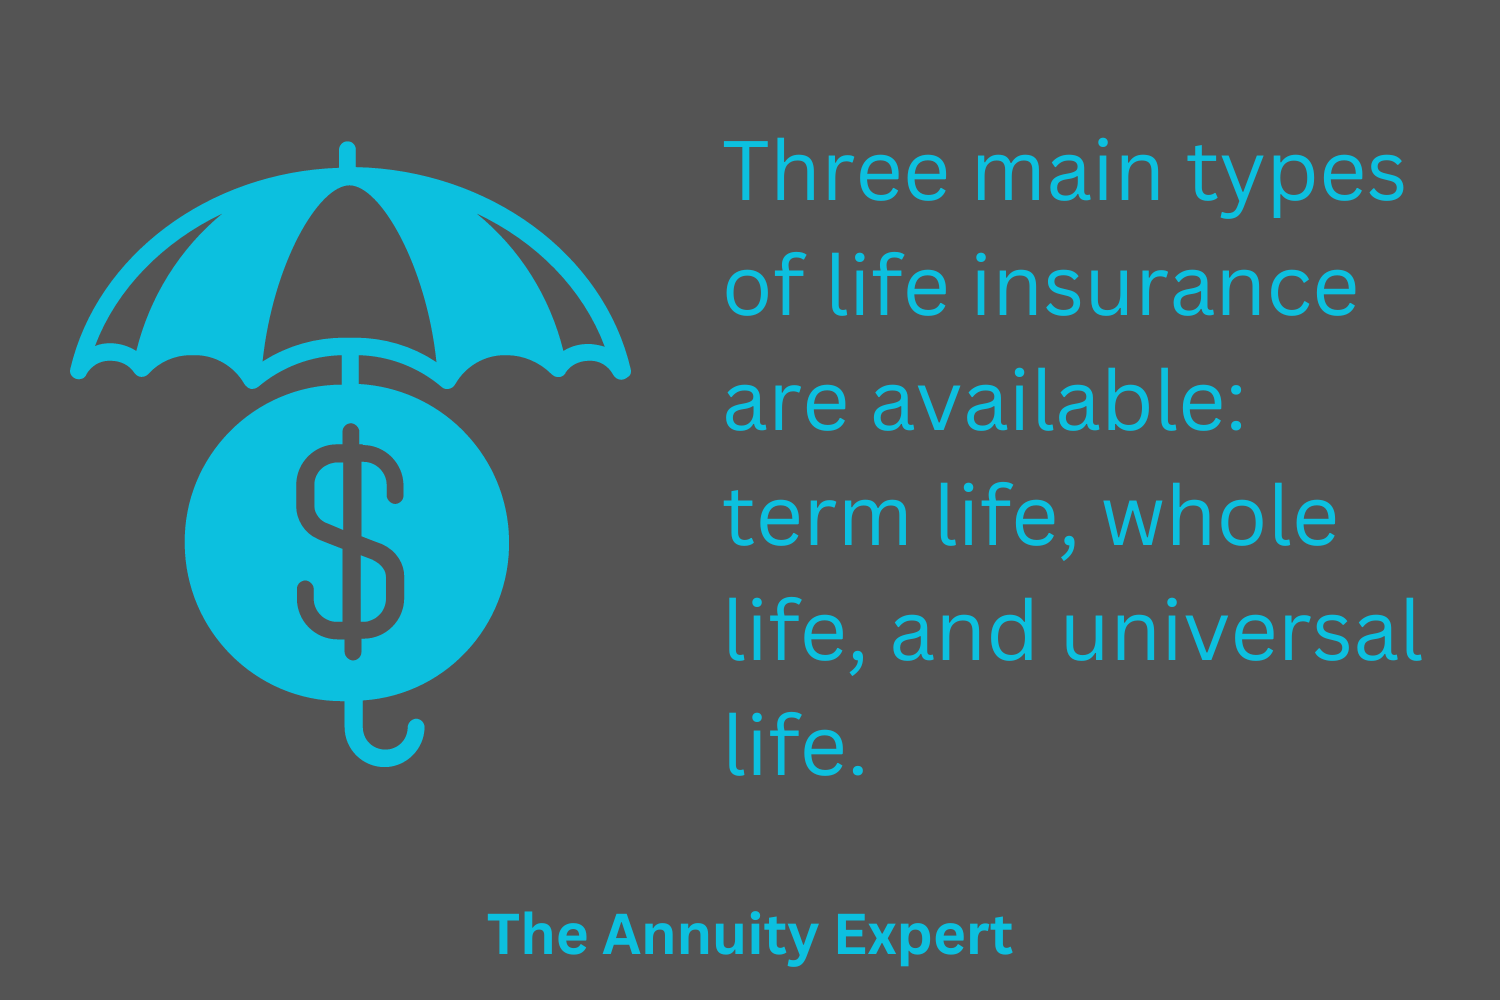 What Are The Three Main Types Of Life Insurance?